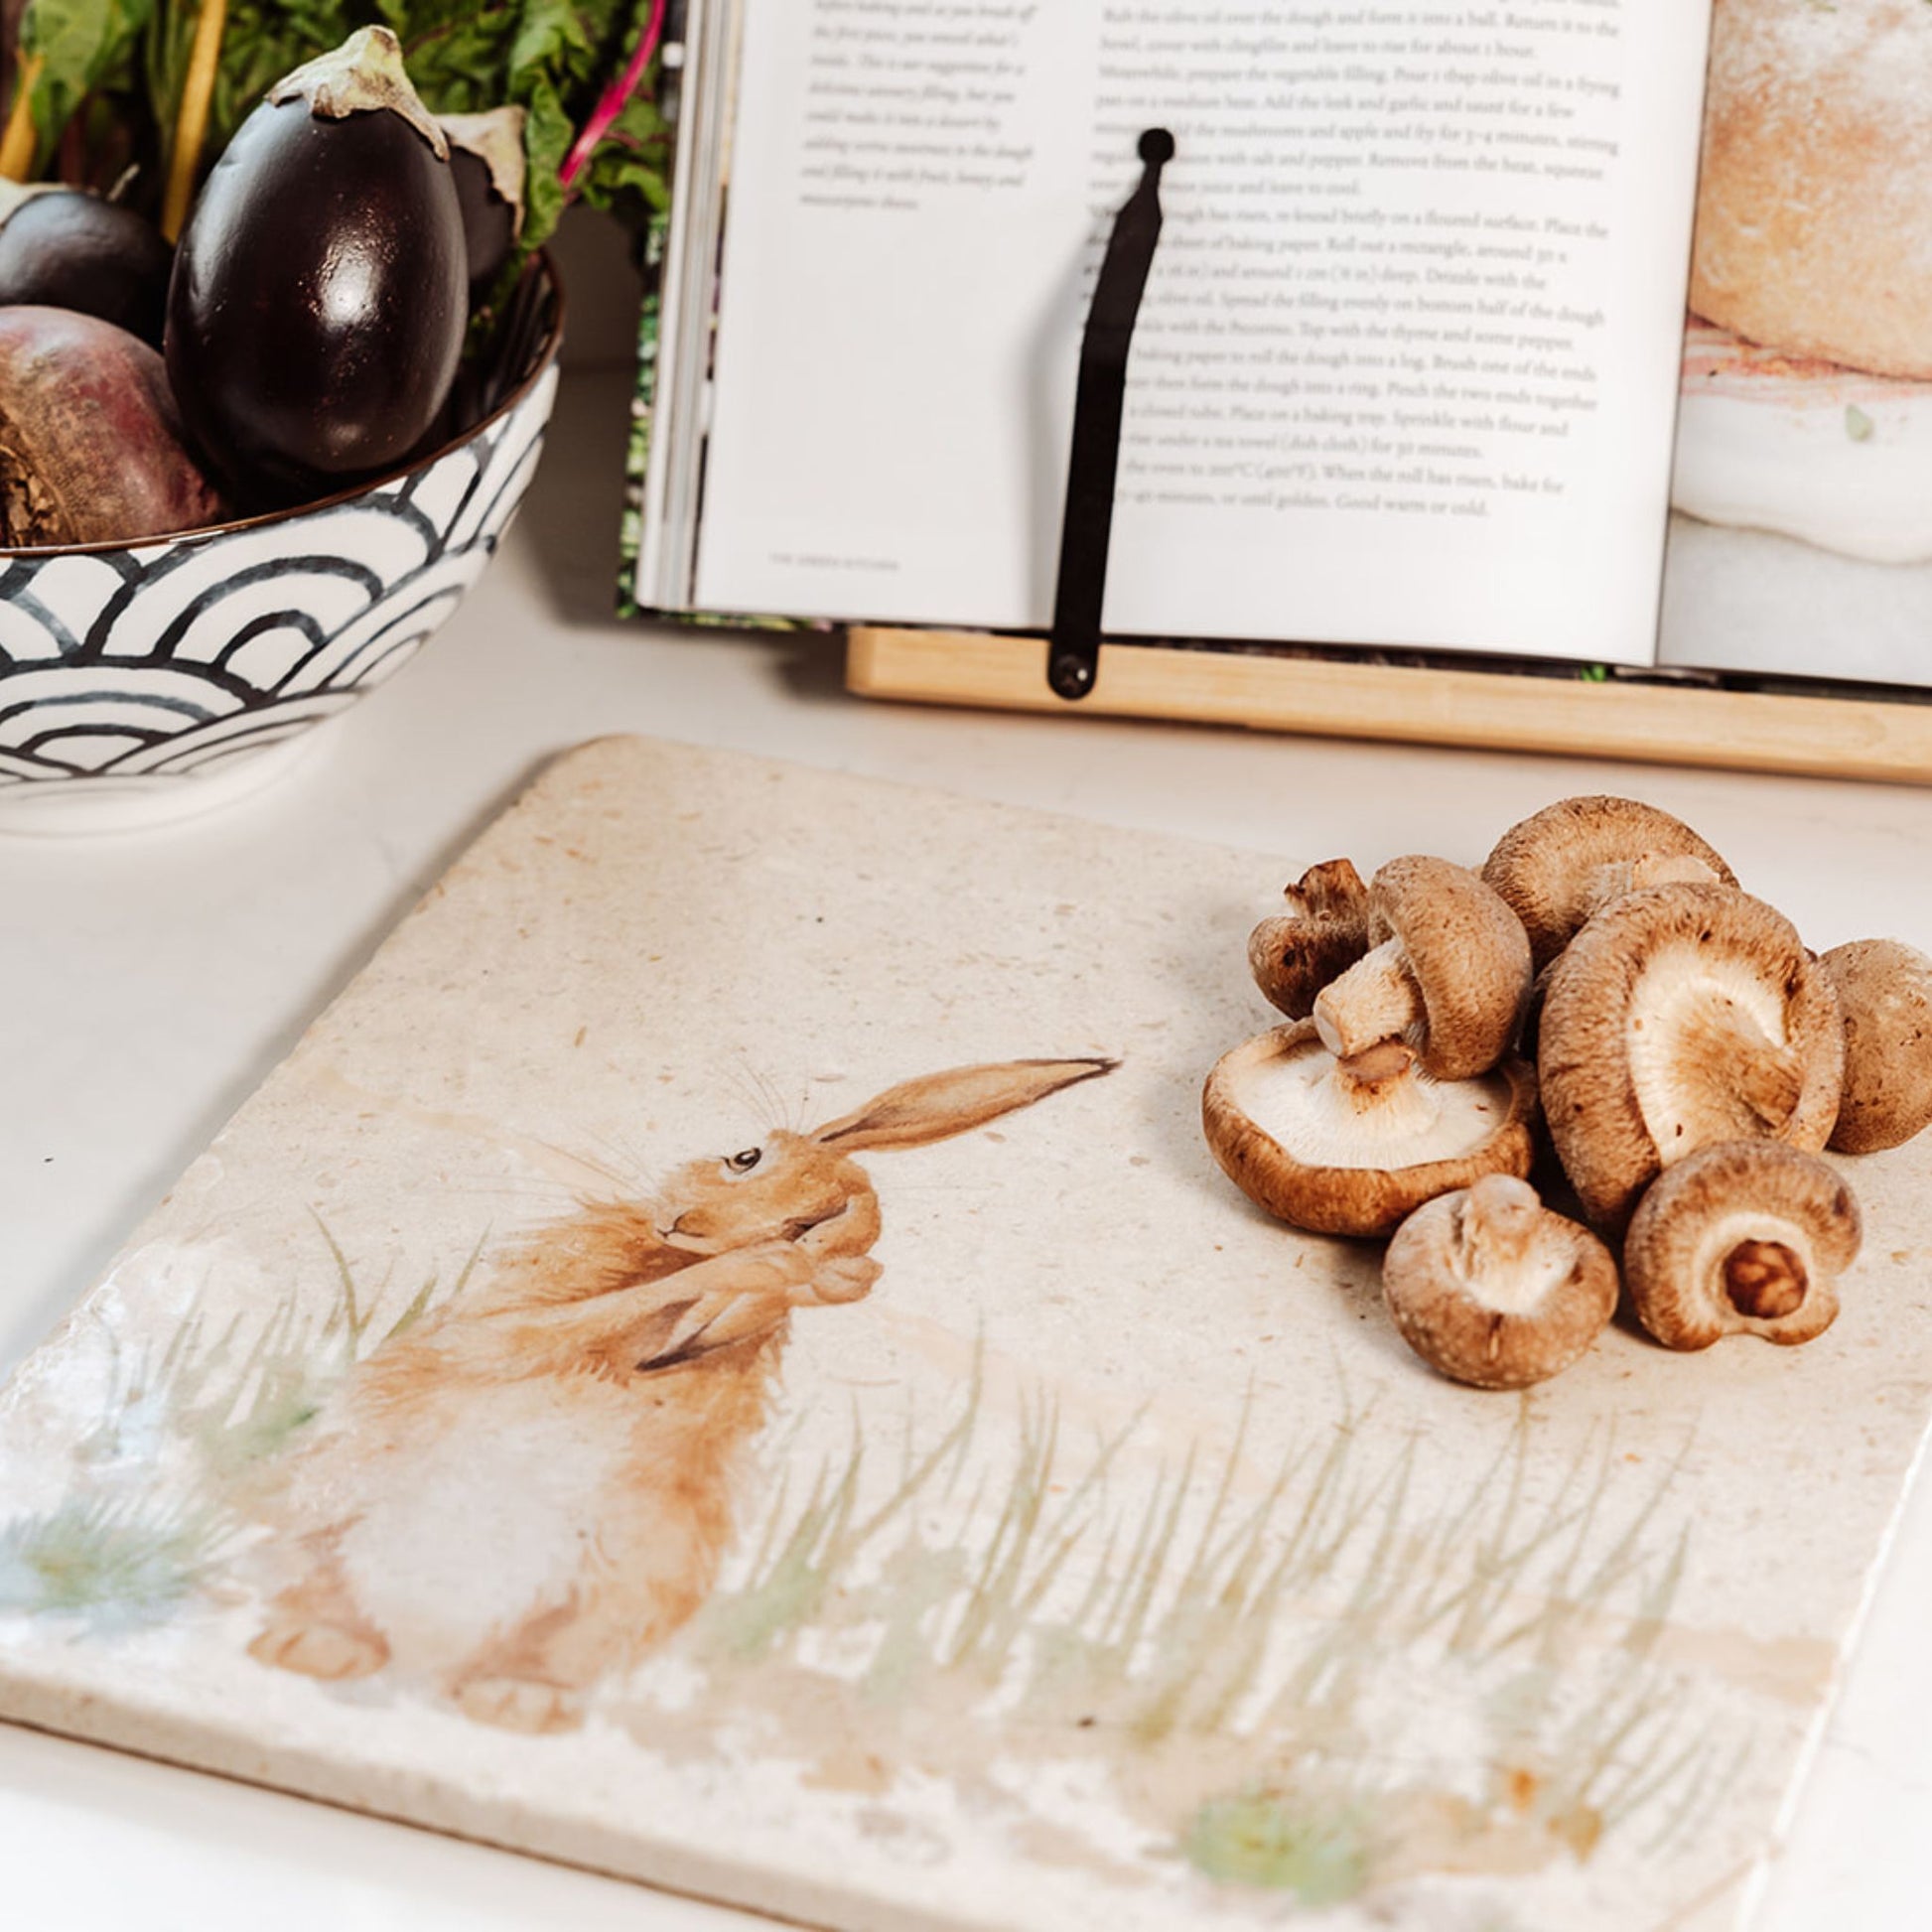 A large square marble platter on a kitchen worktop with a recipe book propped up behind it. The platter has a hare design on it, and is being used as a worktop saver.